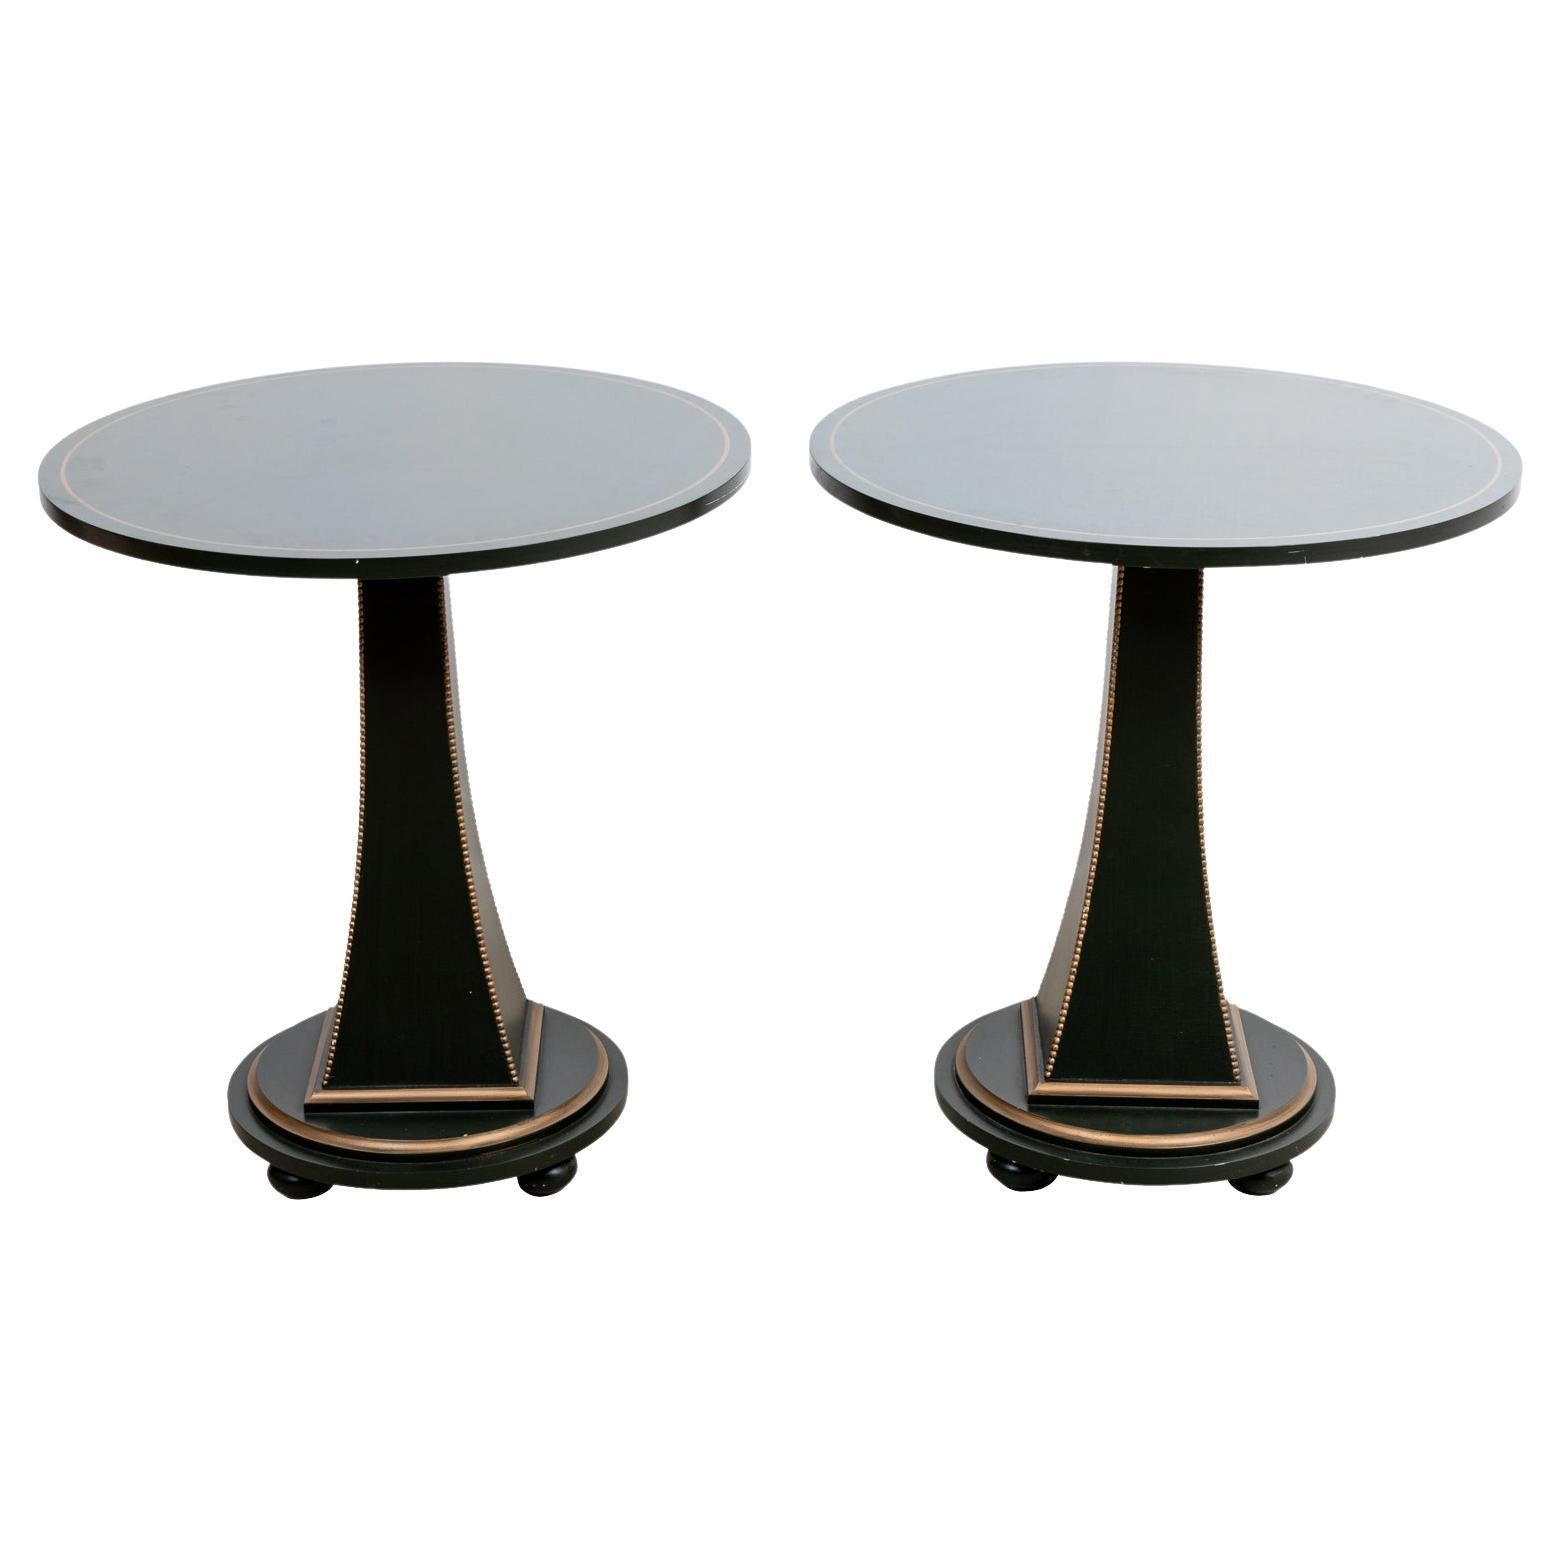 Pair of Italian Style Pedestal Tables